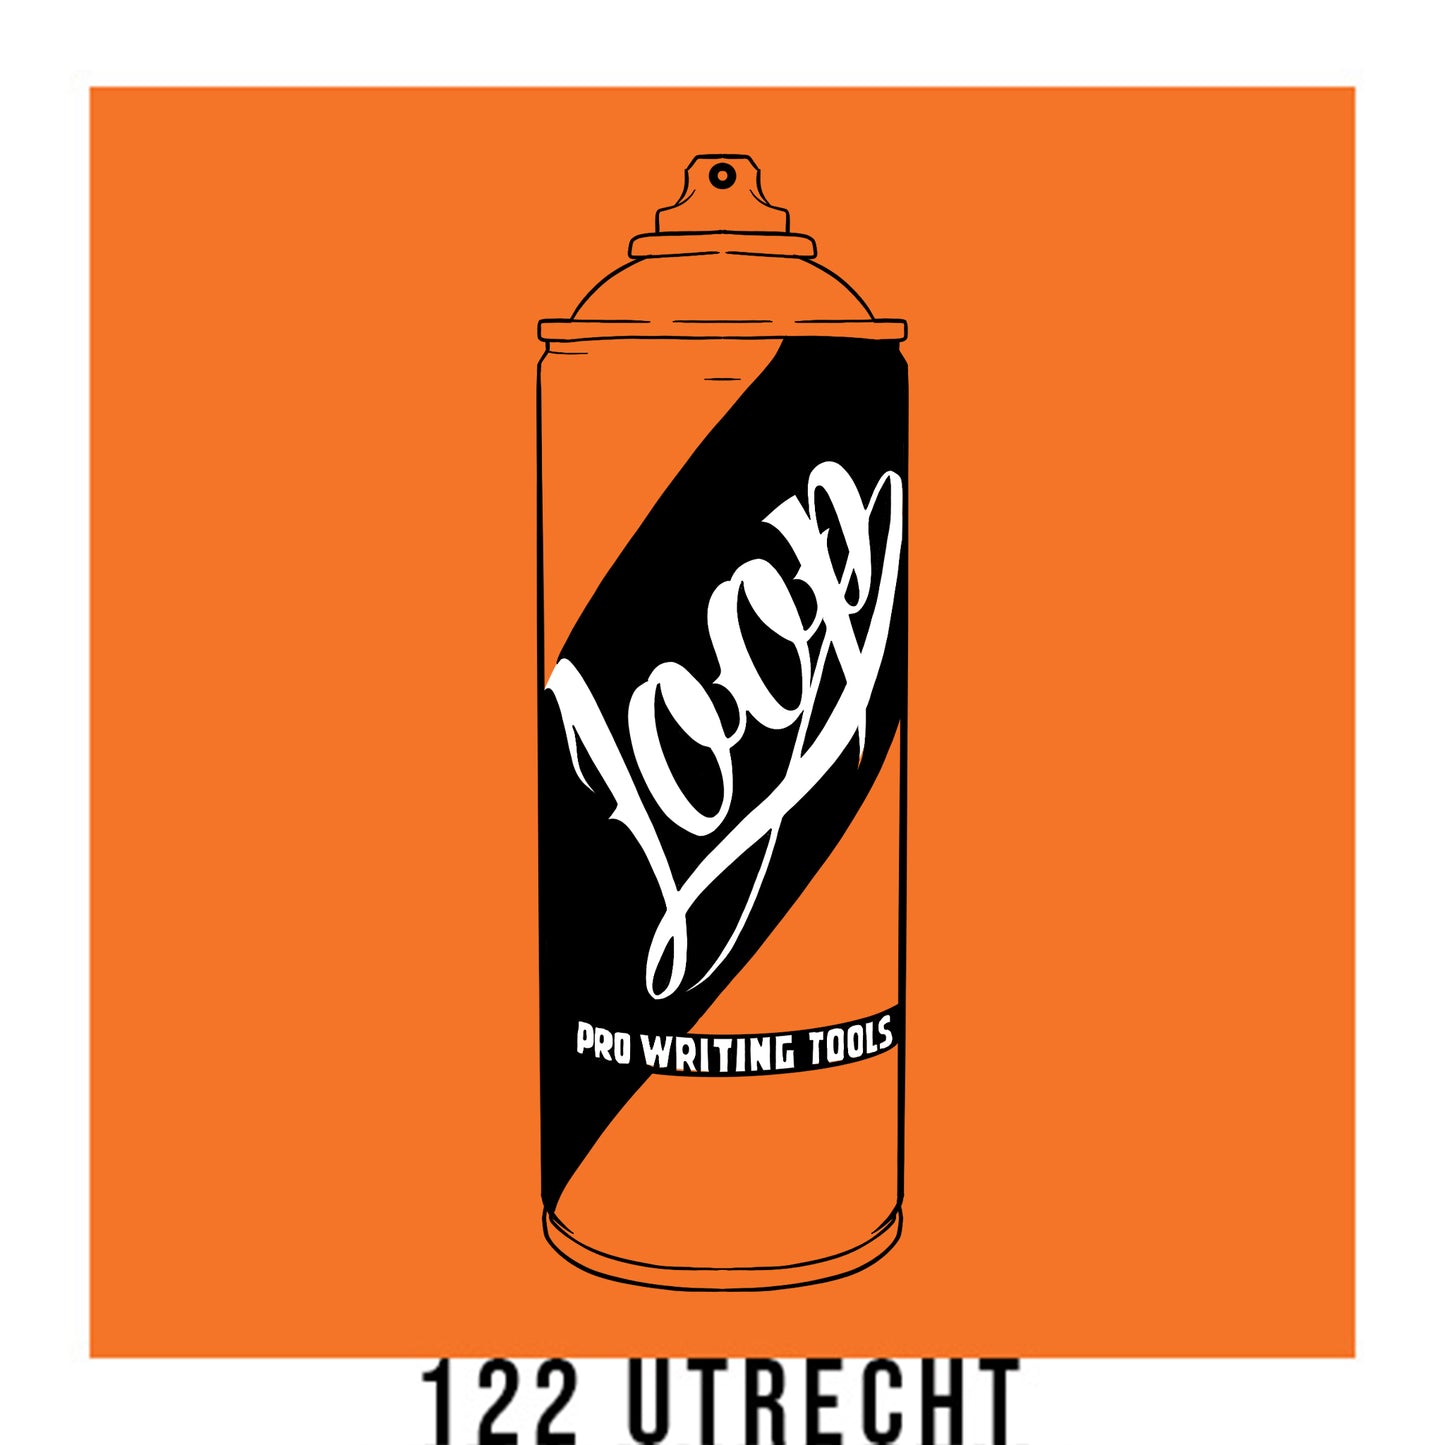 A black outline drawing of a orange spray paint can with the word "Loop" written on the face in script. The background is a color swatch of the same orange with a white border with the words "122 UTRECHT" at the bottom.